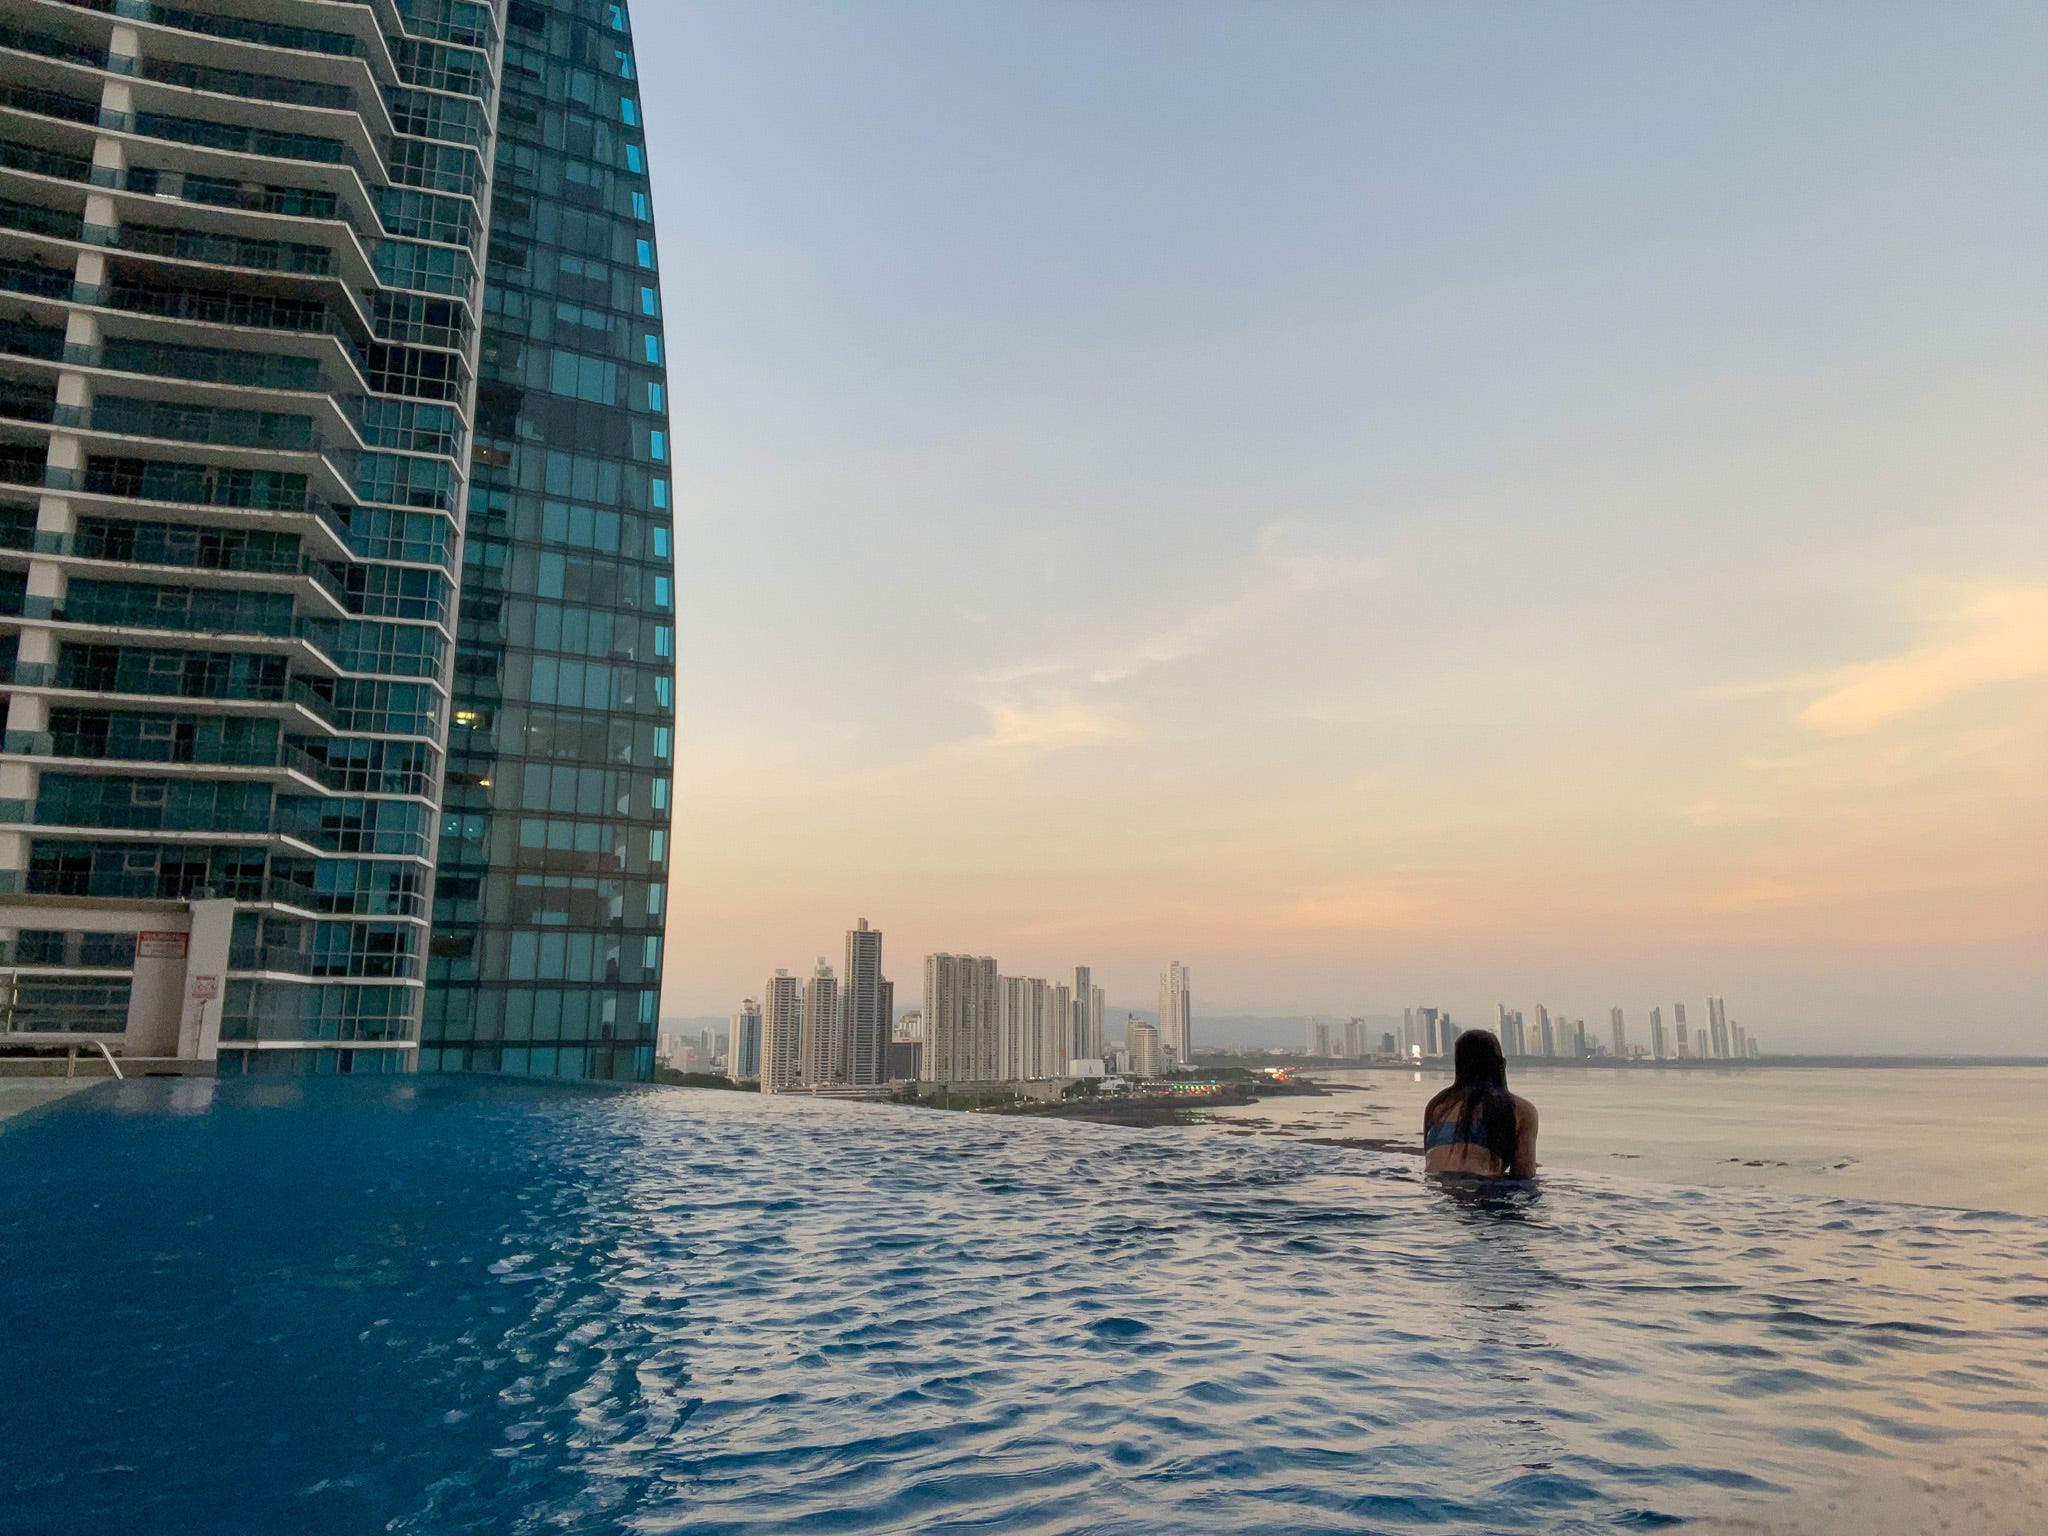 <ul class="summary-list"><li>Punta Pacifica is Panama City's most expensive neighborhood.</li><li>The neighborhood has man-made islands, private marinas, and penthouses worth $5 million.</li><li>I stayed at the five-star JW Marriott Panama and experienced the neighborhood's luxury firsthand.</li></ul><p>Duncan McGowan describes Panama City's Ocean Reef Islands as "perfection."</p><p>The landscaping is manicured flawlessly, never a leaf or branch out of place. You'd have to hunt to find trash anywhere on the islands, and instead, you're more likely to notice bird songs filling the air.</p><p>Looking one way, all you see is the endless ocean. Turn around, and there's a stunning cityscape behind you, McGowan, the president of <a href="https://www.puntapacificarealty.com/">Punta Pacifica Realty</a>, told Business Insider.</p><p>The Ocean Reef Islands are part of Panama's Punta Pacifica neighborhood, and that perfection is exactly what Panama's wealthiest residents seek.</p><p>On a recent trip to the country, I saw the opulence that residents chase across Punta Pacifica, Panama's wealthiest neighborhood.</p><div class="read-original">Read the original article on <a href="https://www.businessinsider.com/punta-pacifica-panama-richest-neighborhood-photos-2024-5">Business Insider</a></div>